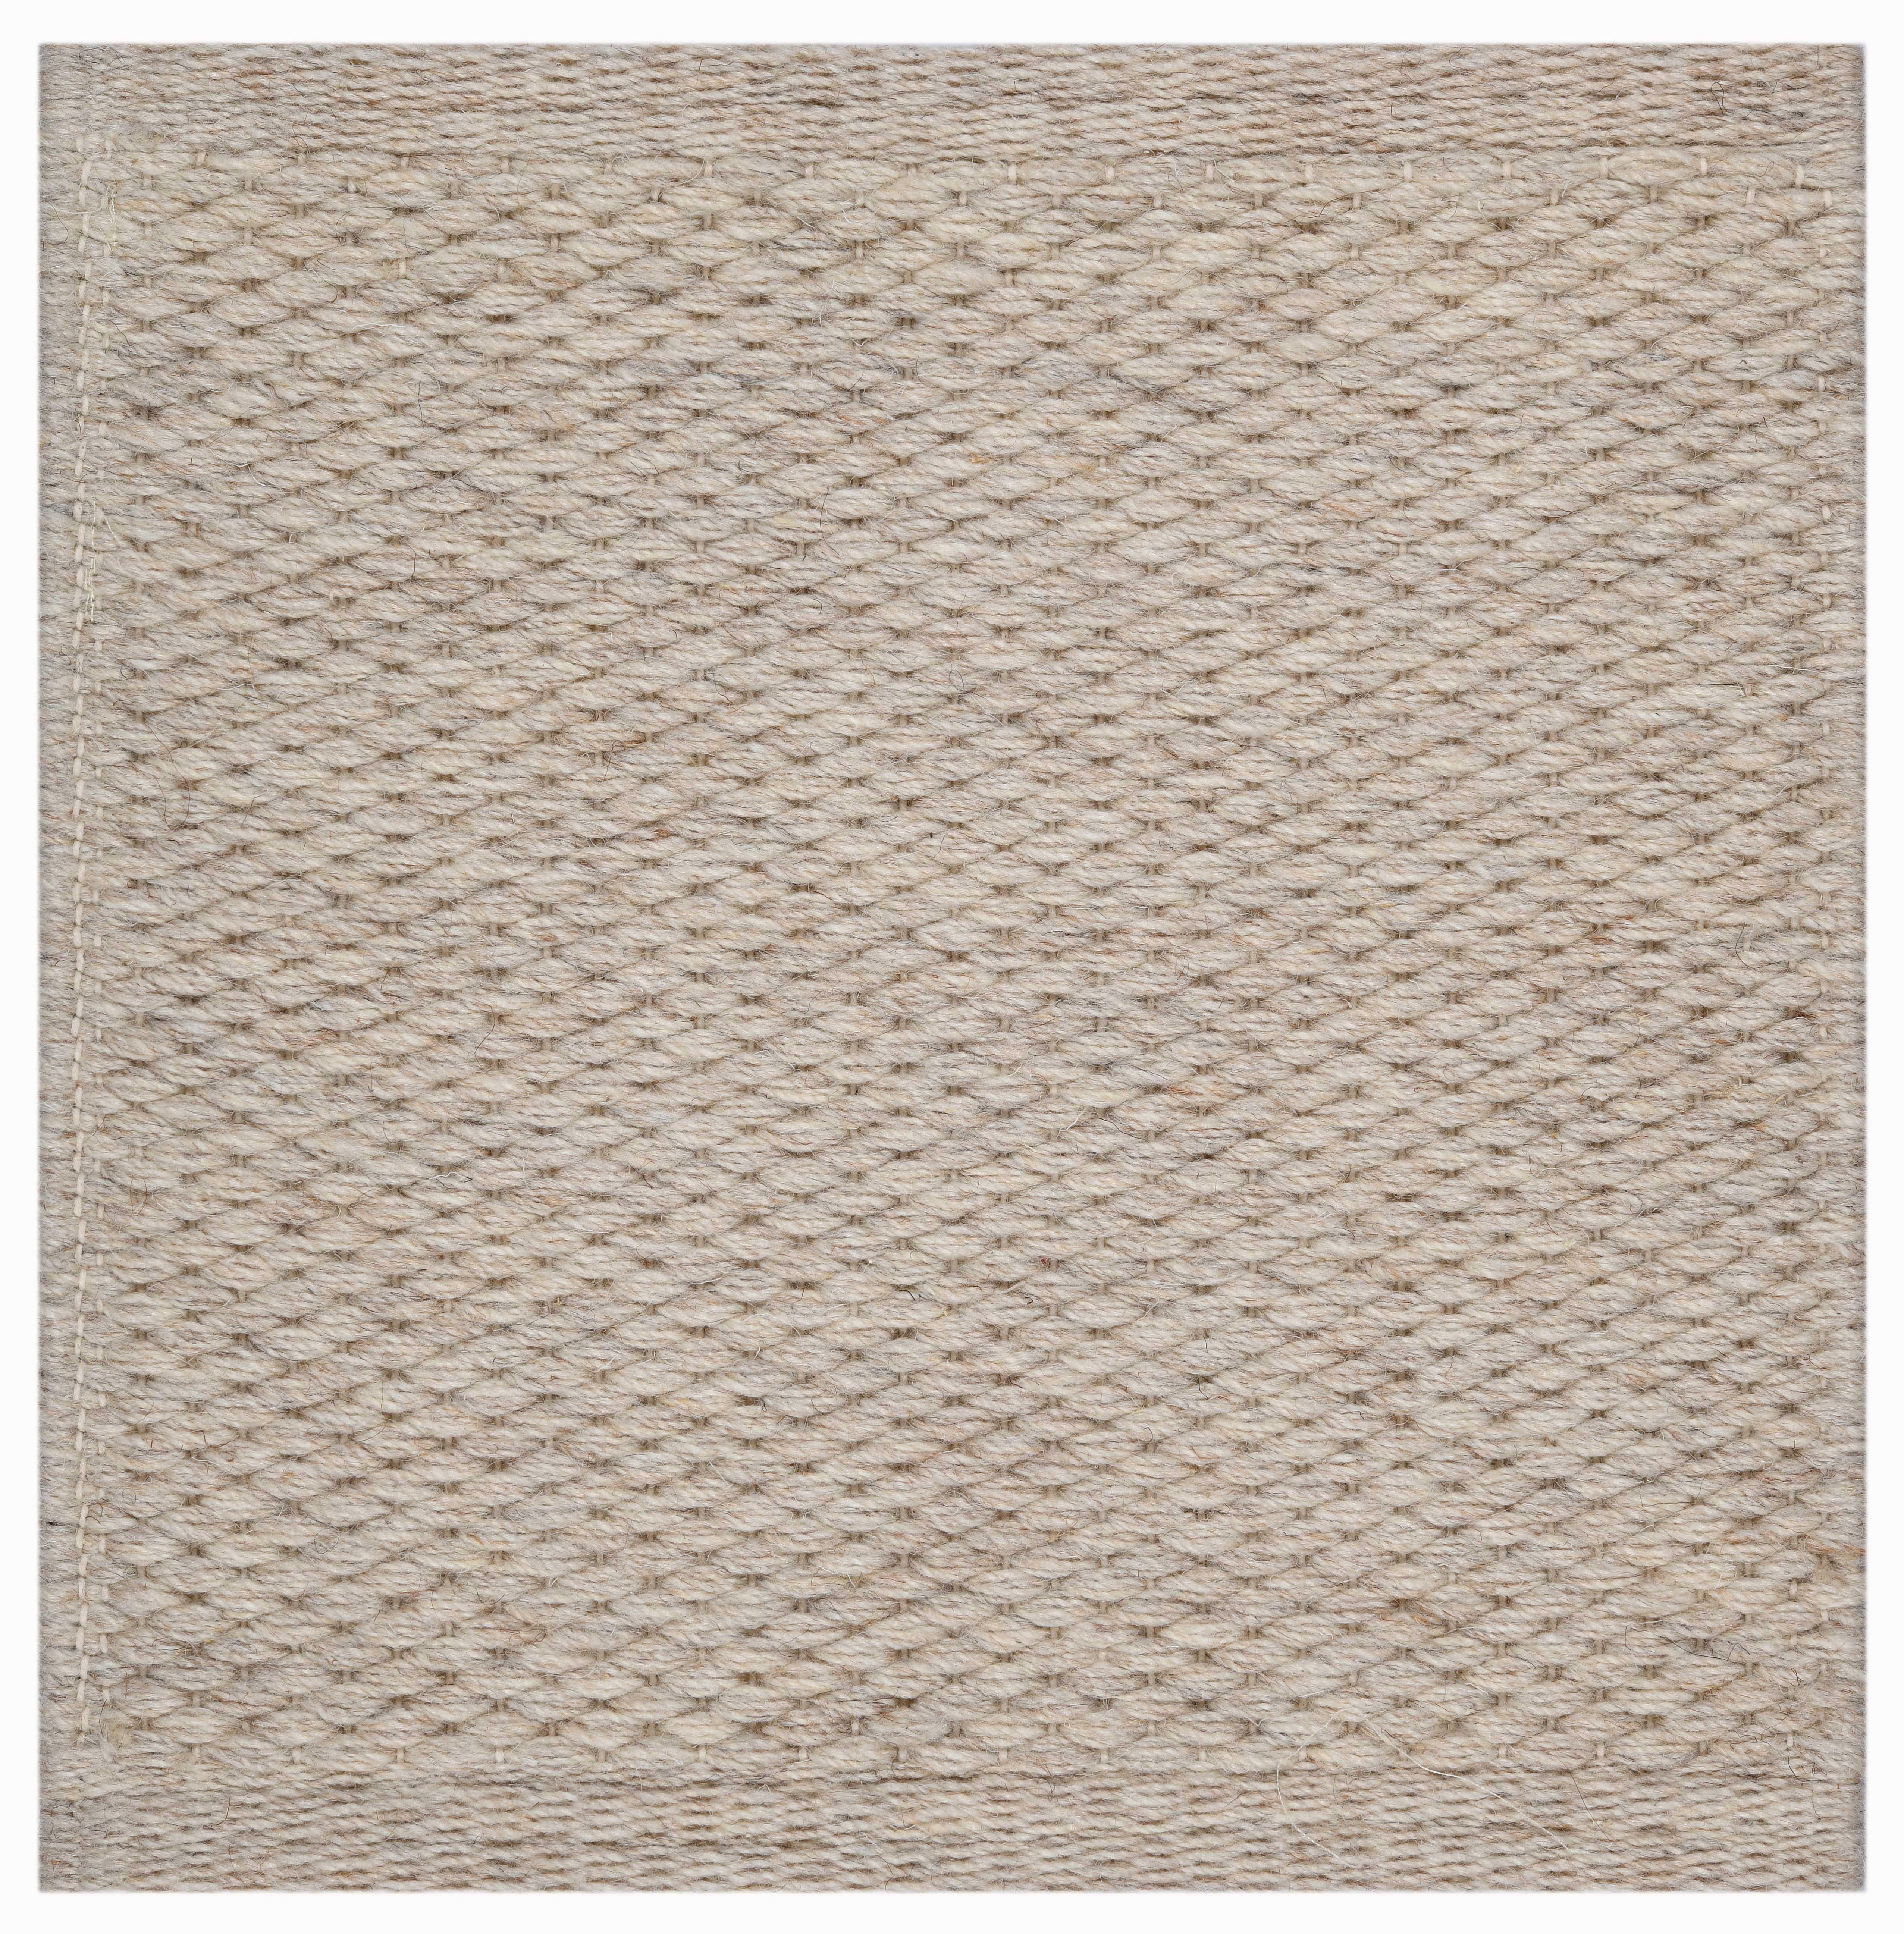 Contemporary Quies, Beige, Handwoven, New Zealand and Mediterranean wools, 6' x 9' For Sale